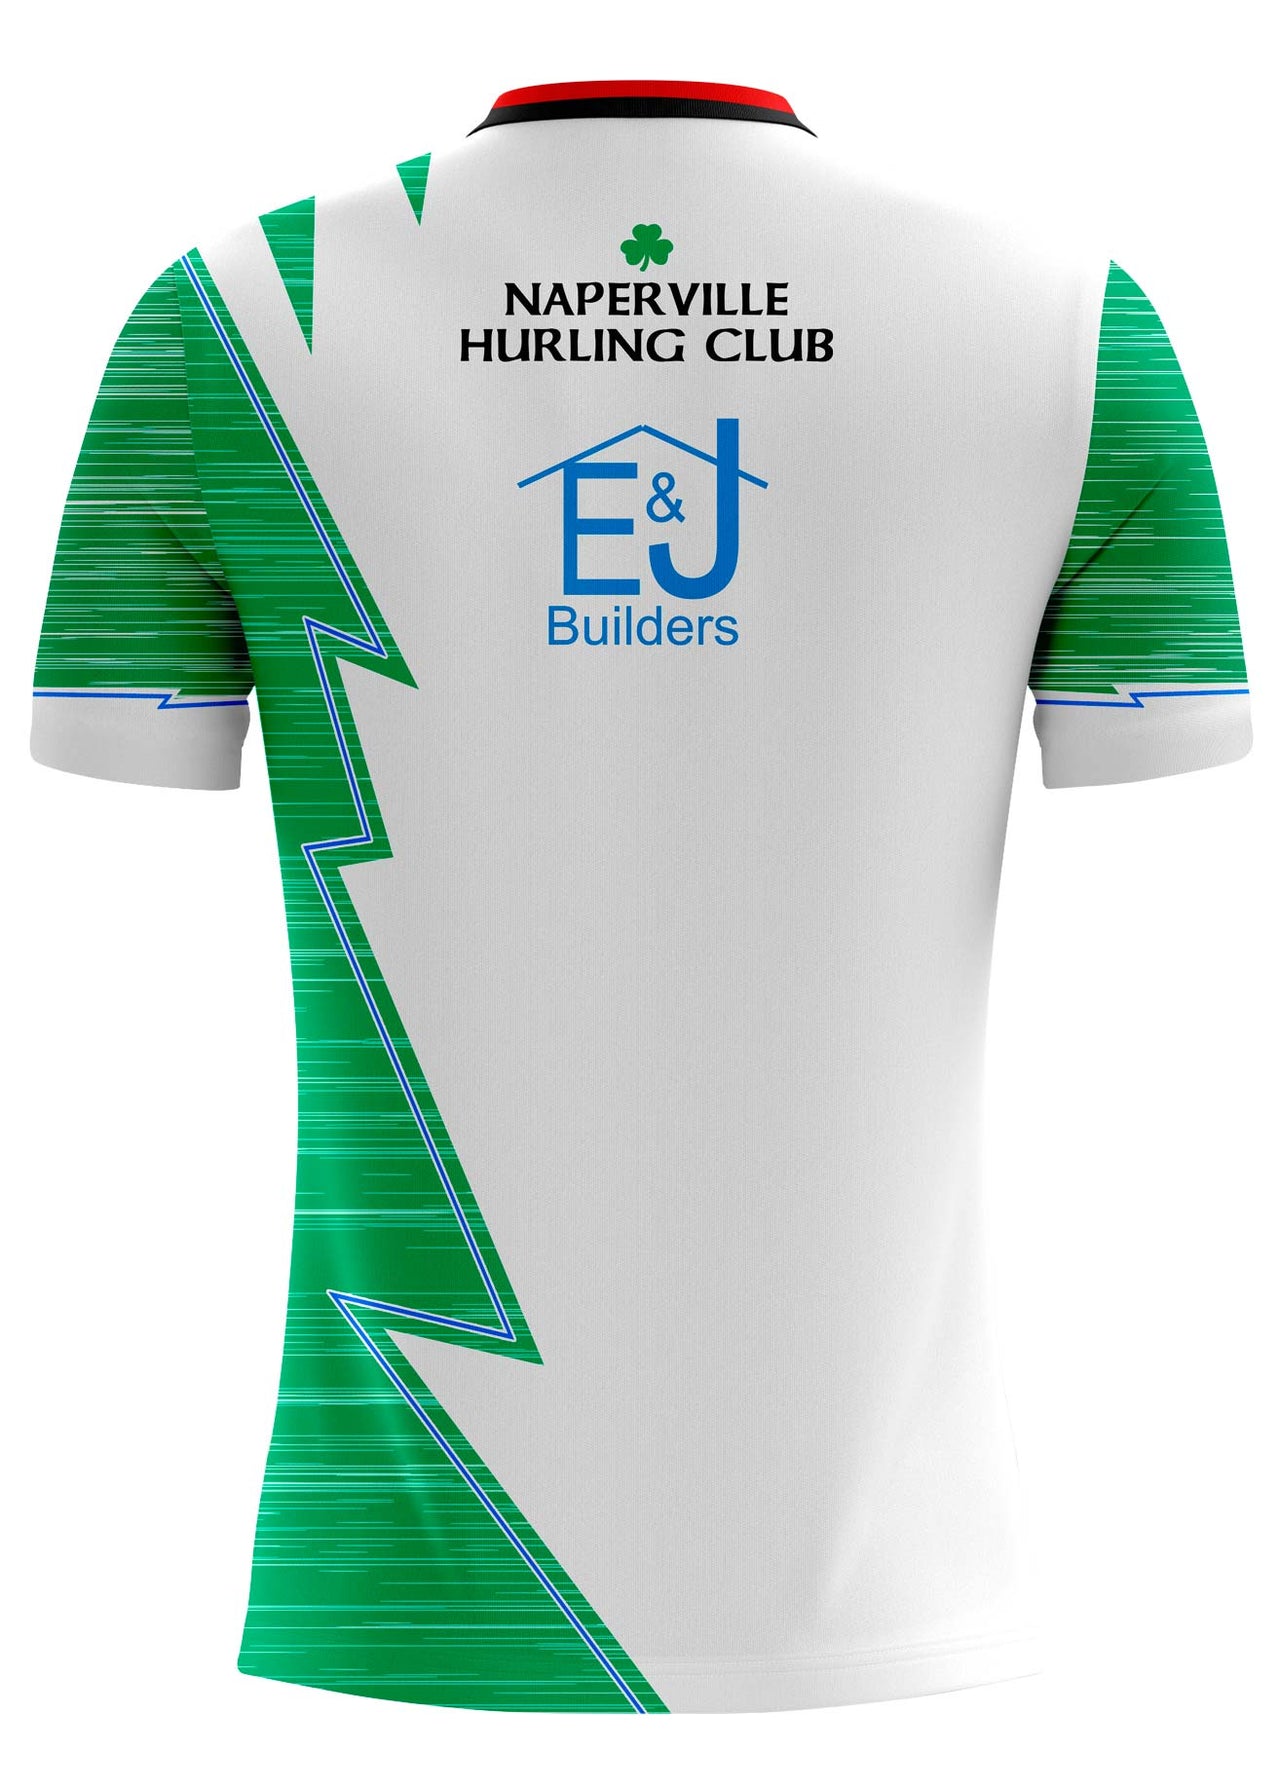 Naperville Hurling Club Clarke White Jersey Player Fit Adult